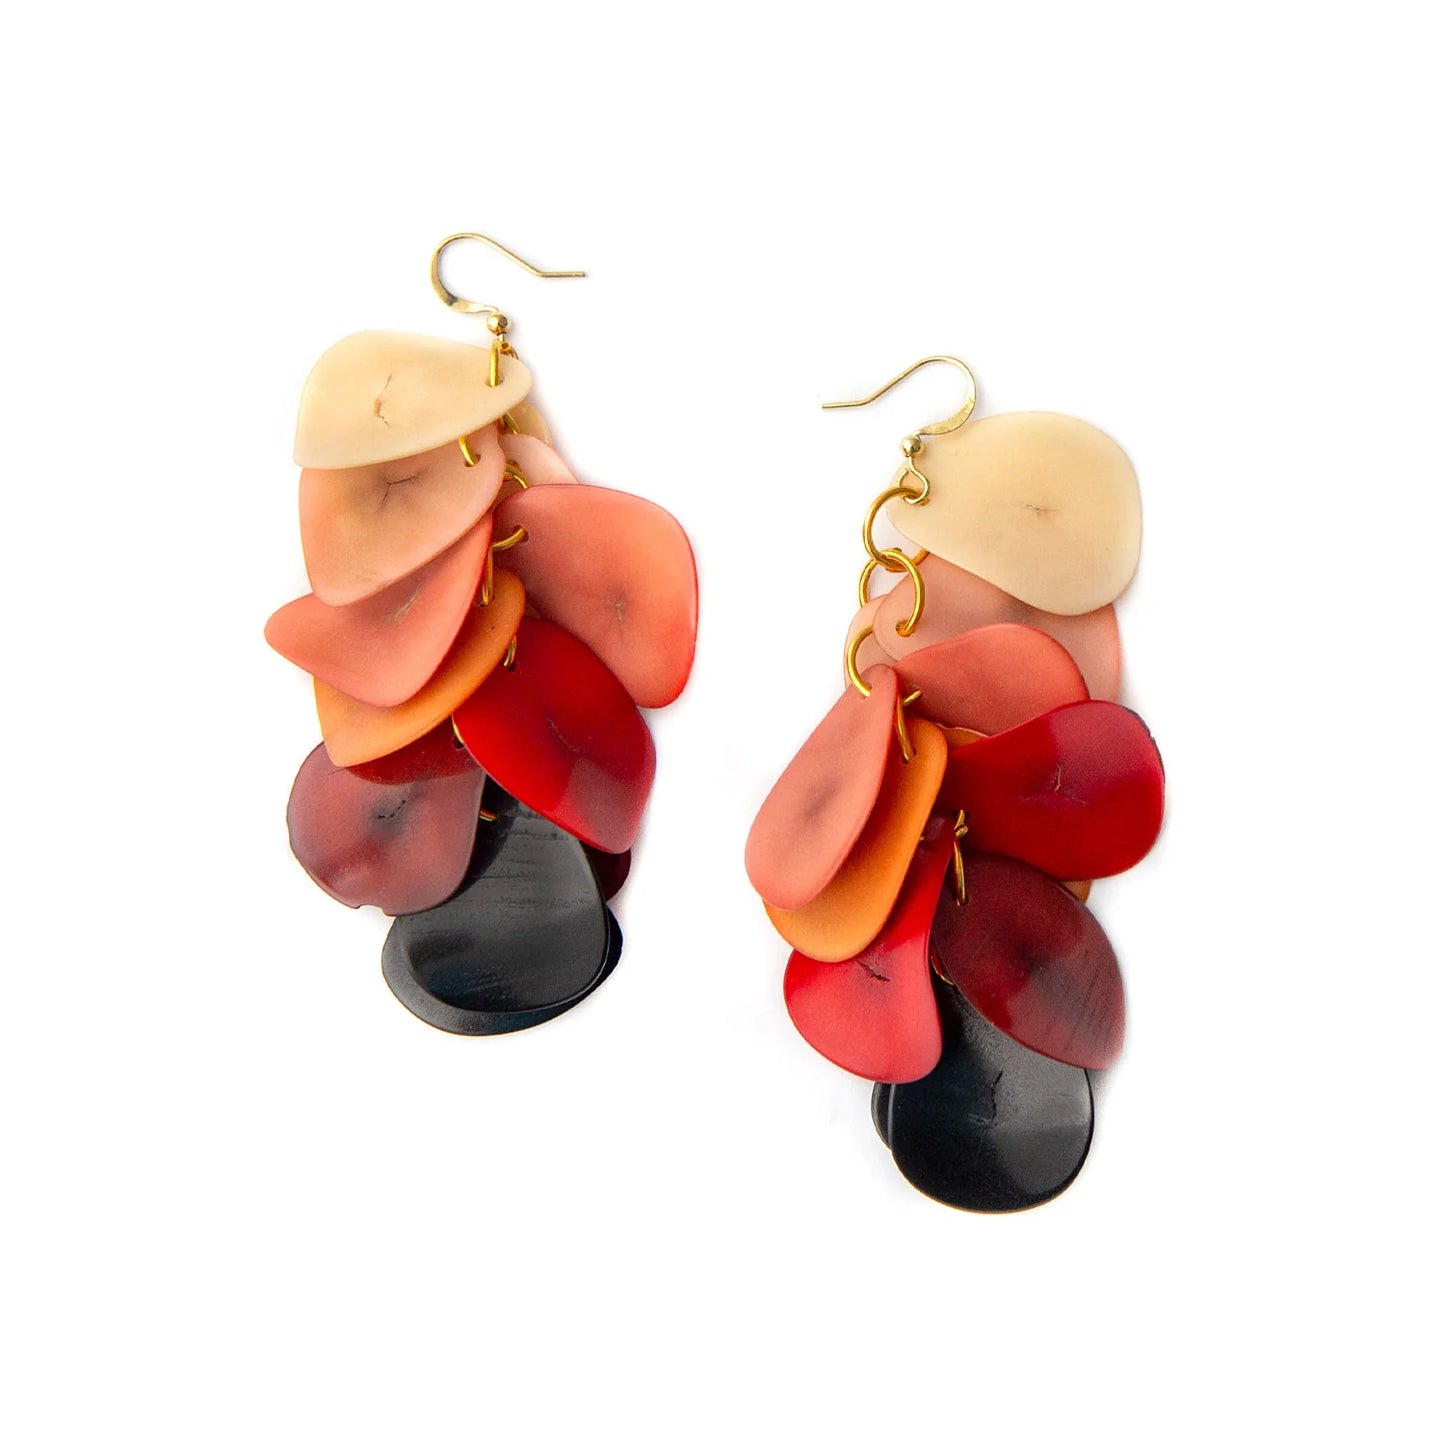 Handcrafted Multi Color Drop Earrings